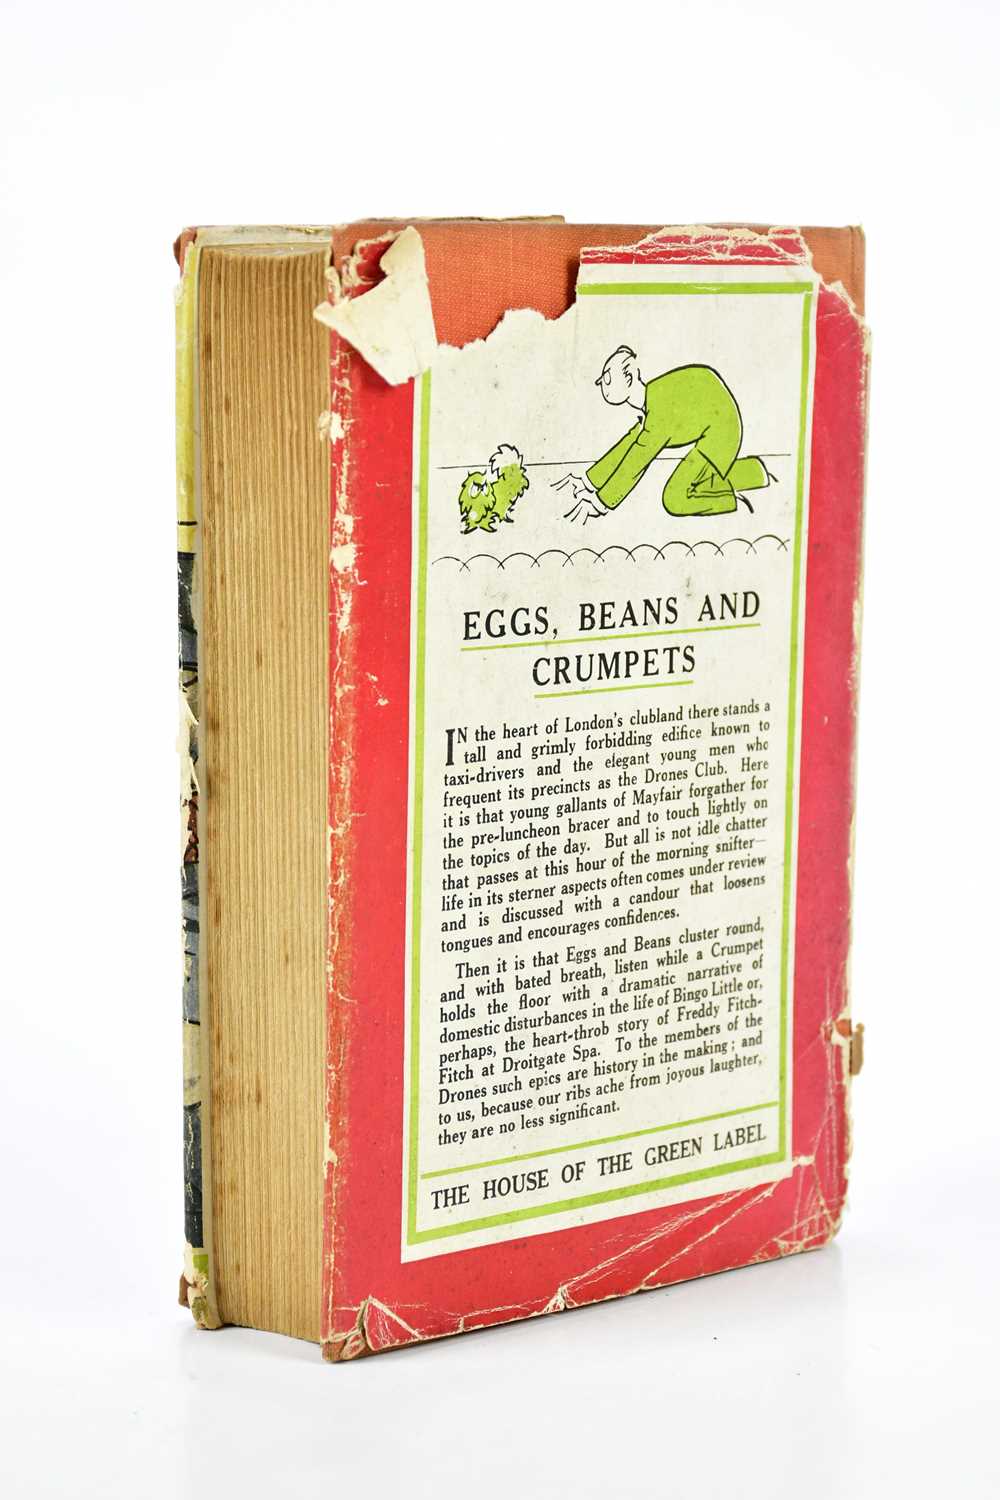 WODEHOUSE (P.G), EGGS, BEANS AND CRUMPETS, first edition, d.j., orange cloth, Herbert Jenkins, - Image 2 of 3